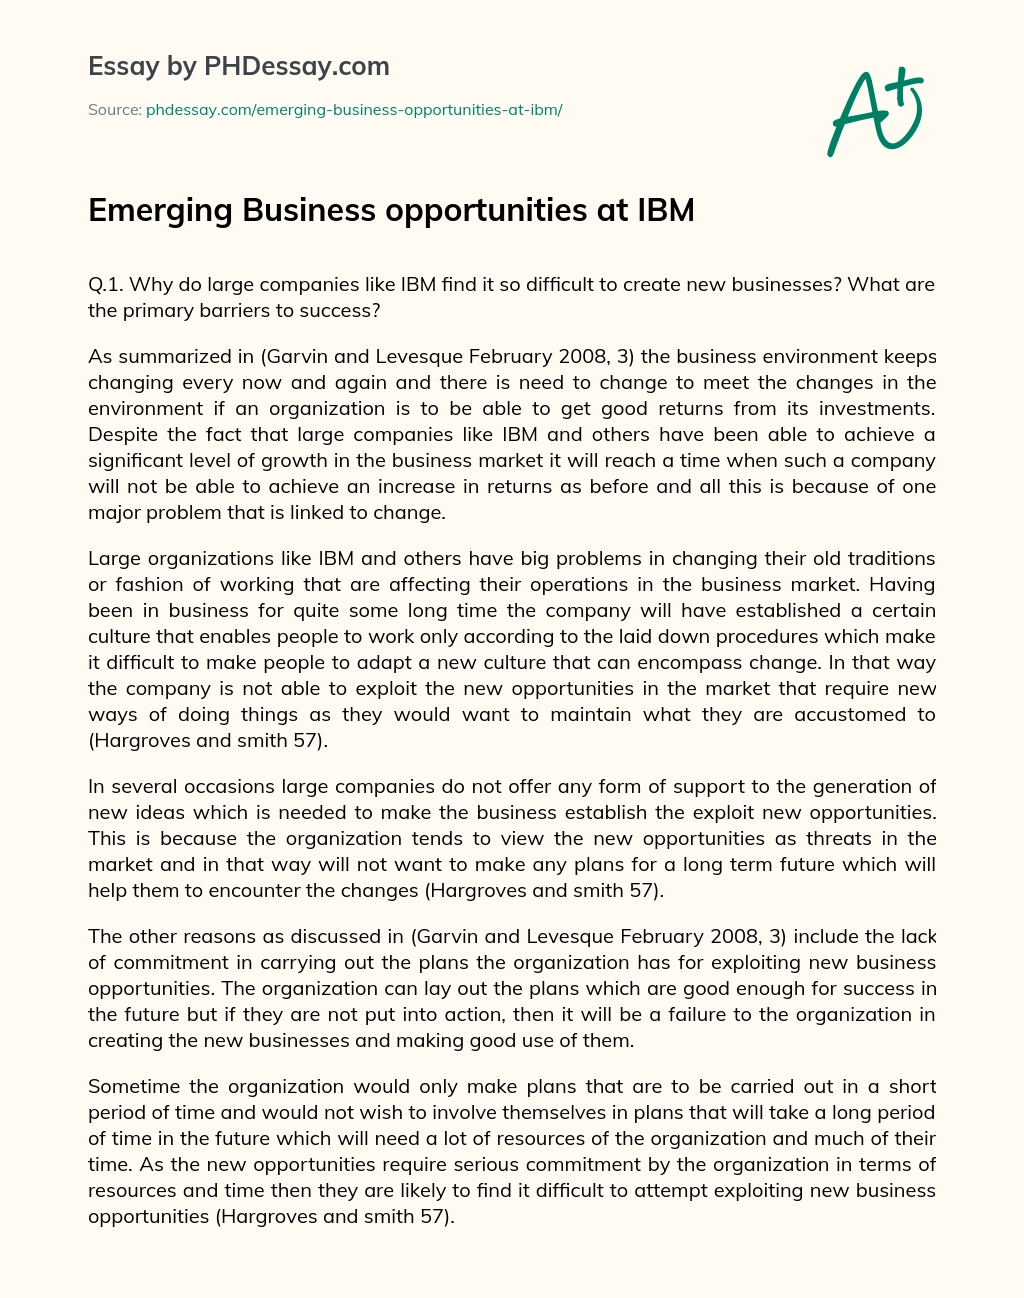 Emerging Business opportunities at IBM essay